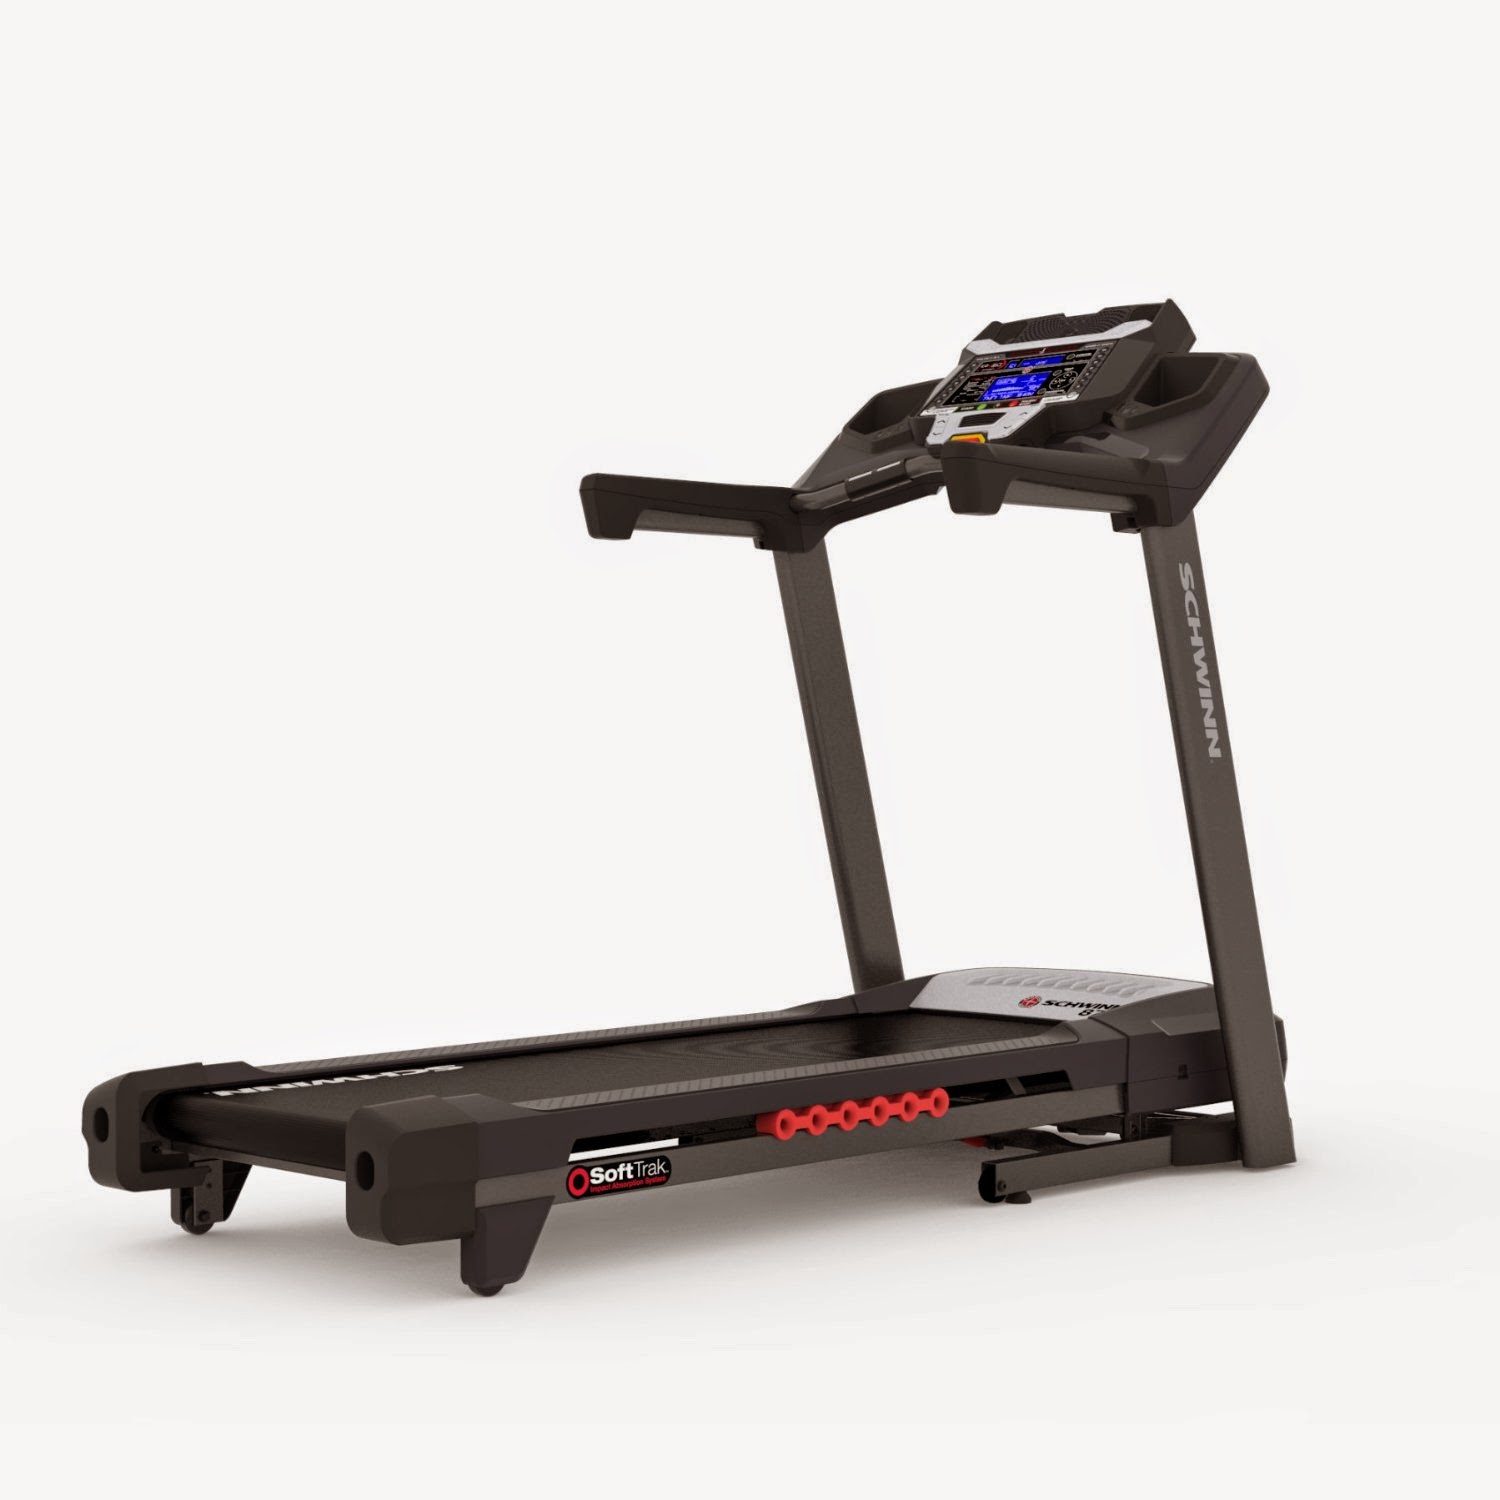 Schwinn 870 Treadmill, review and compare with Nautilus T616, difference in frame color style